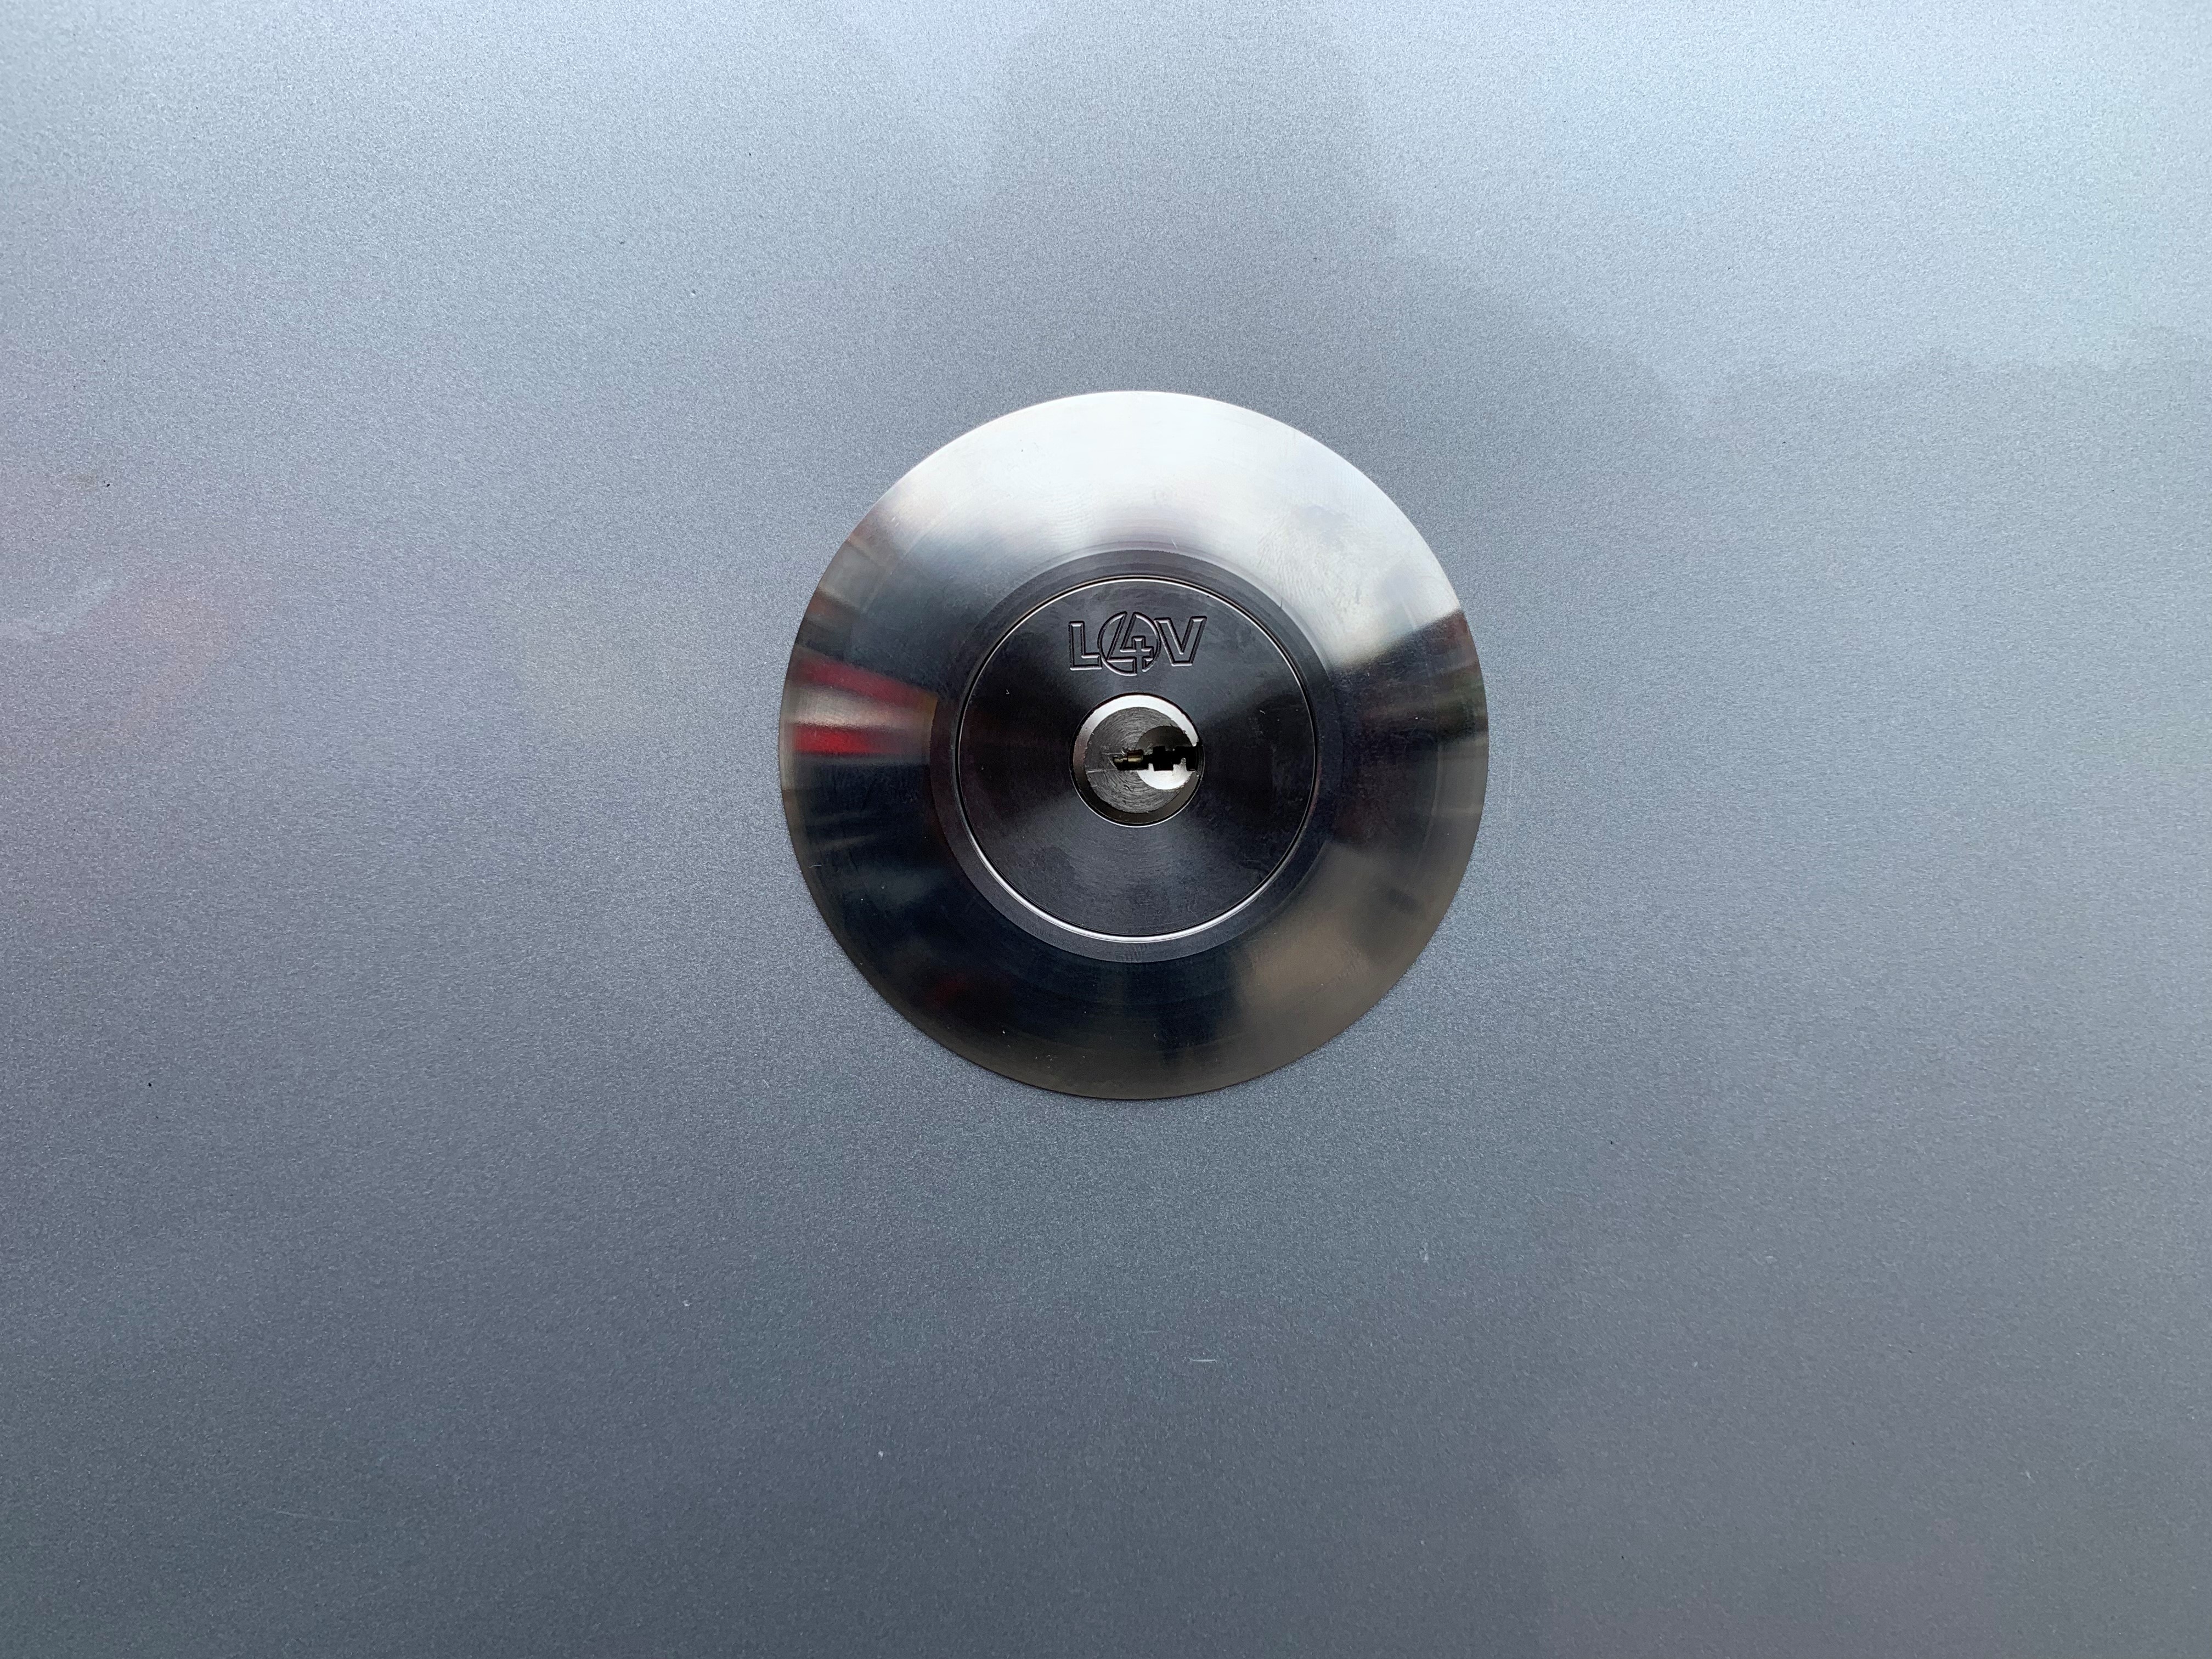 Van Slamlocks fitted by Auto Installation Services